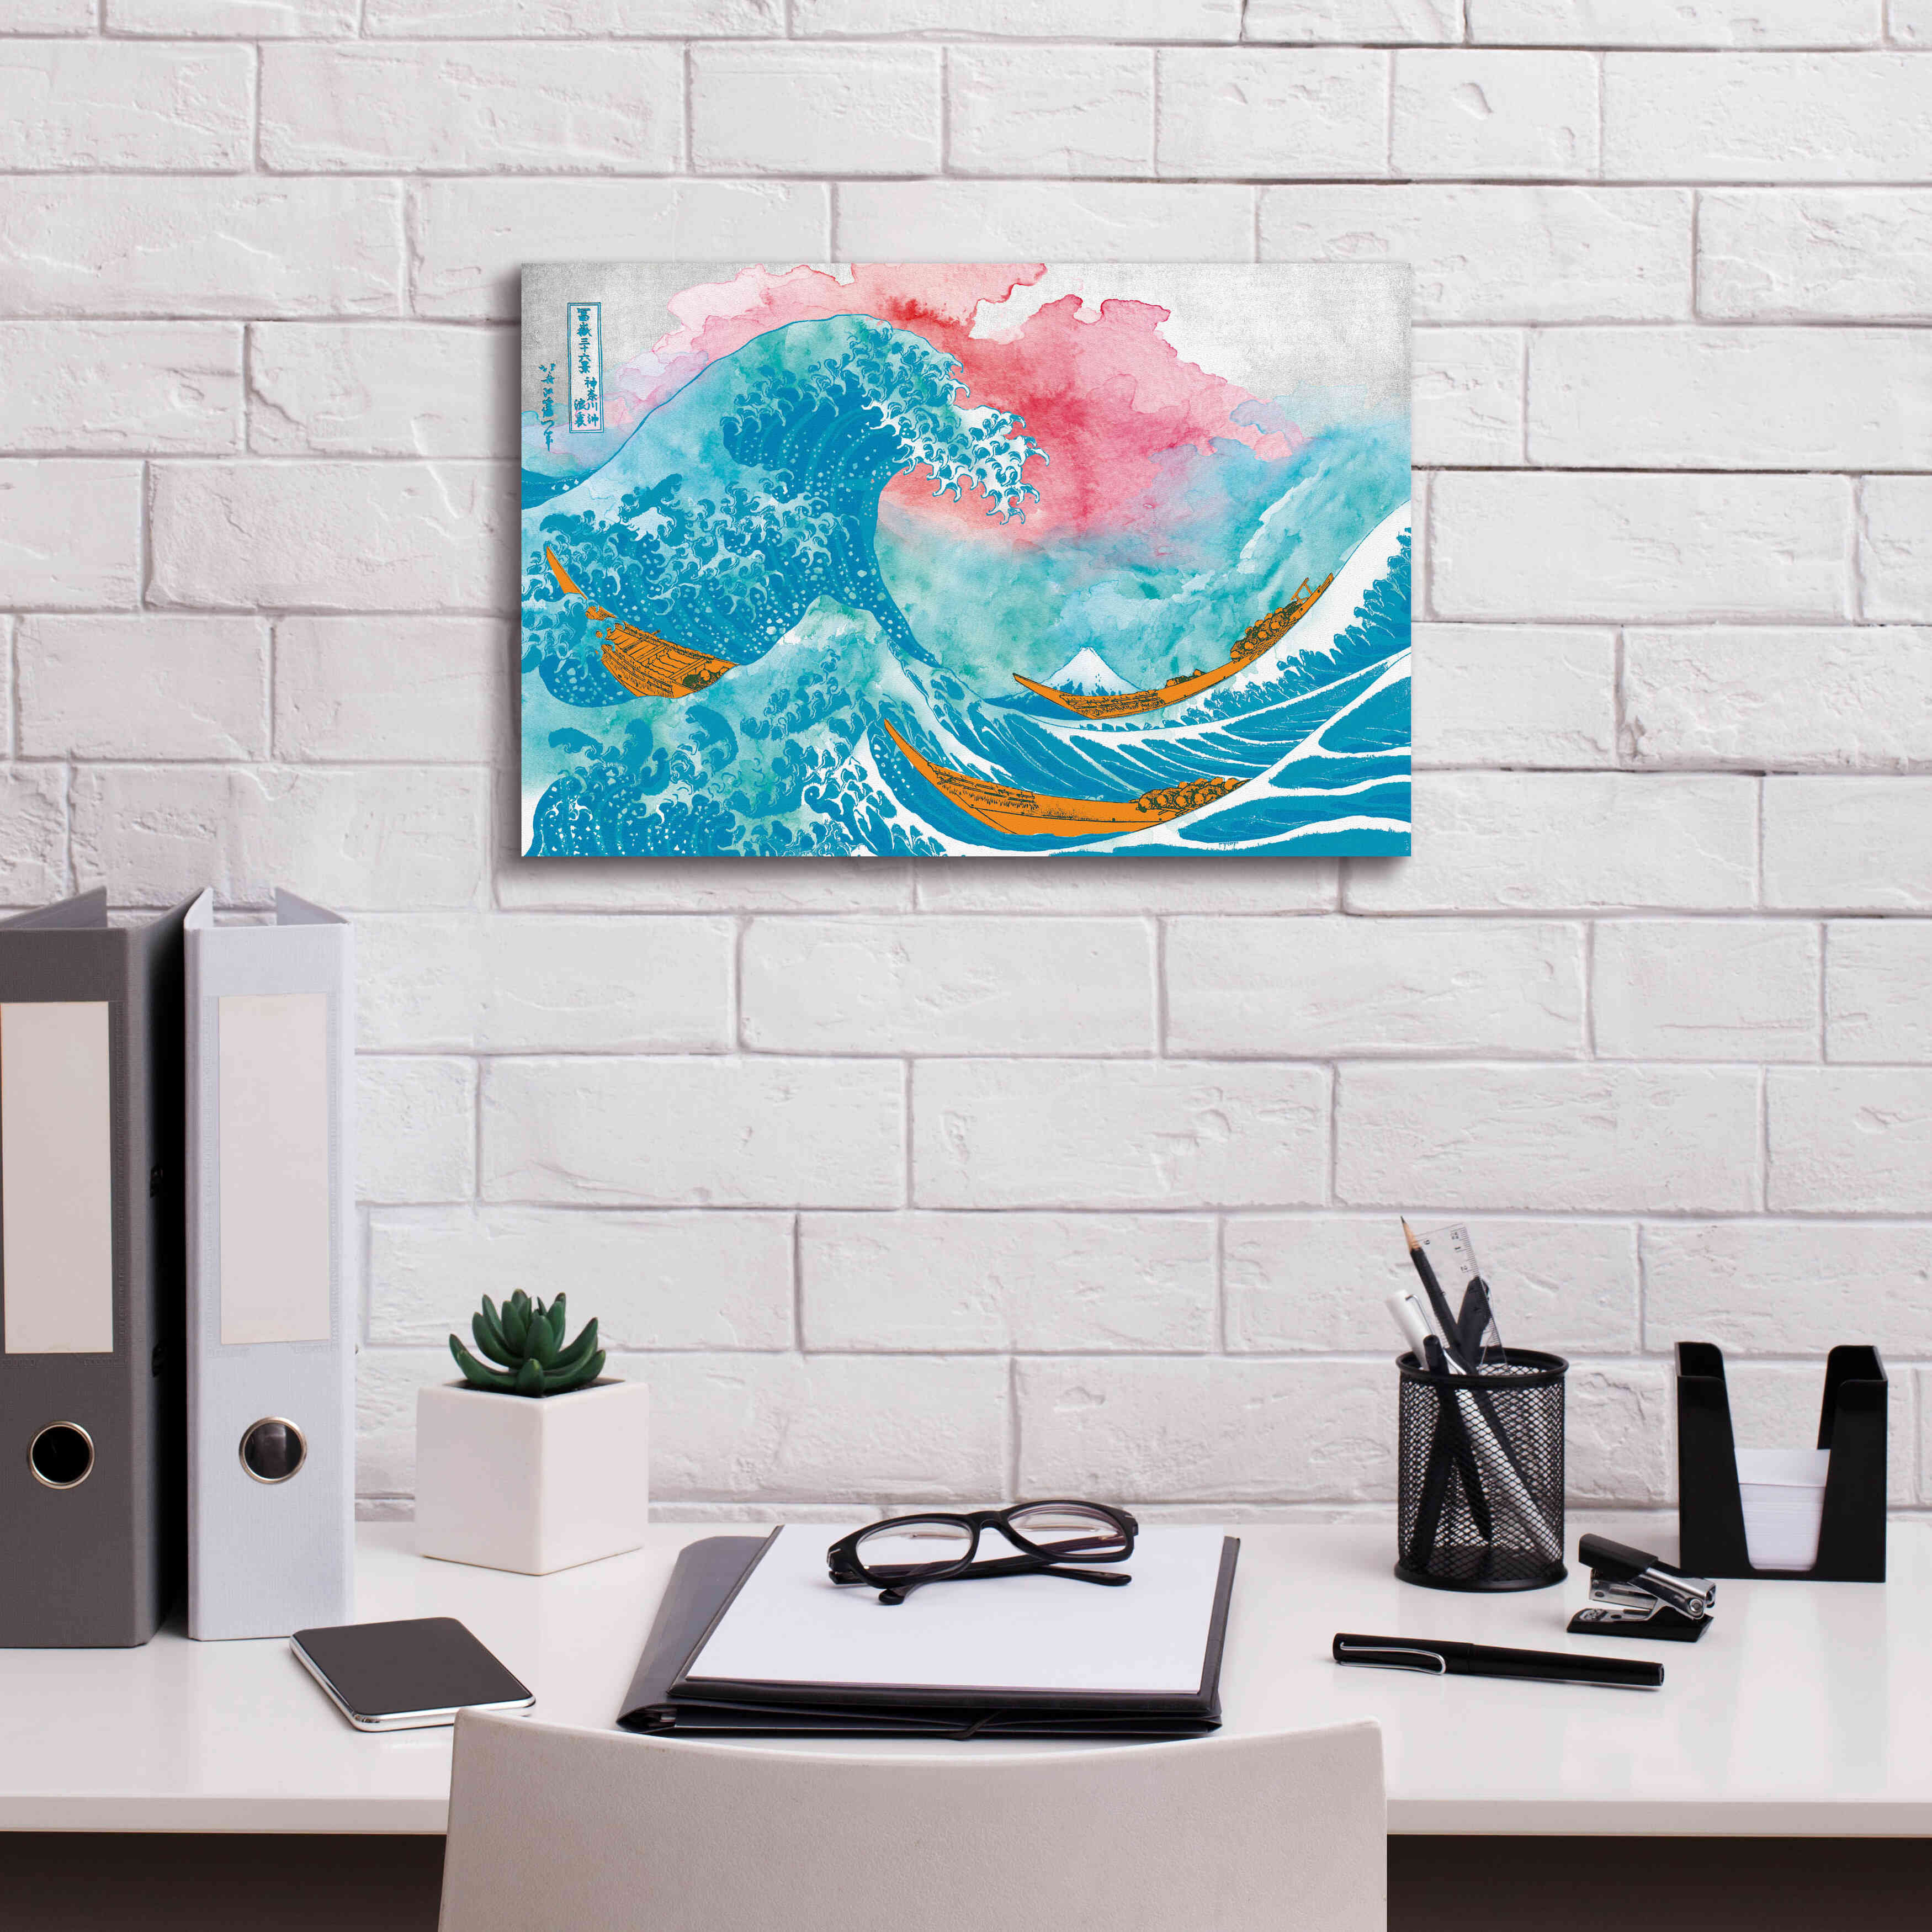 Dovecove Epic Graffiti 'The Great Teal Wave' By Porter Hast The Great Teal  Wave On Canvas by Porter Hastings Print Wayfair